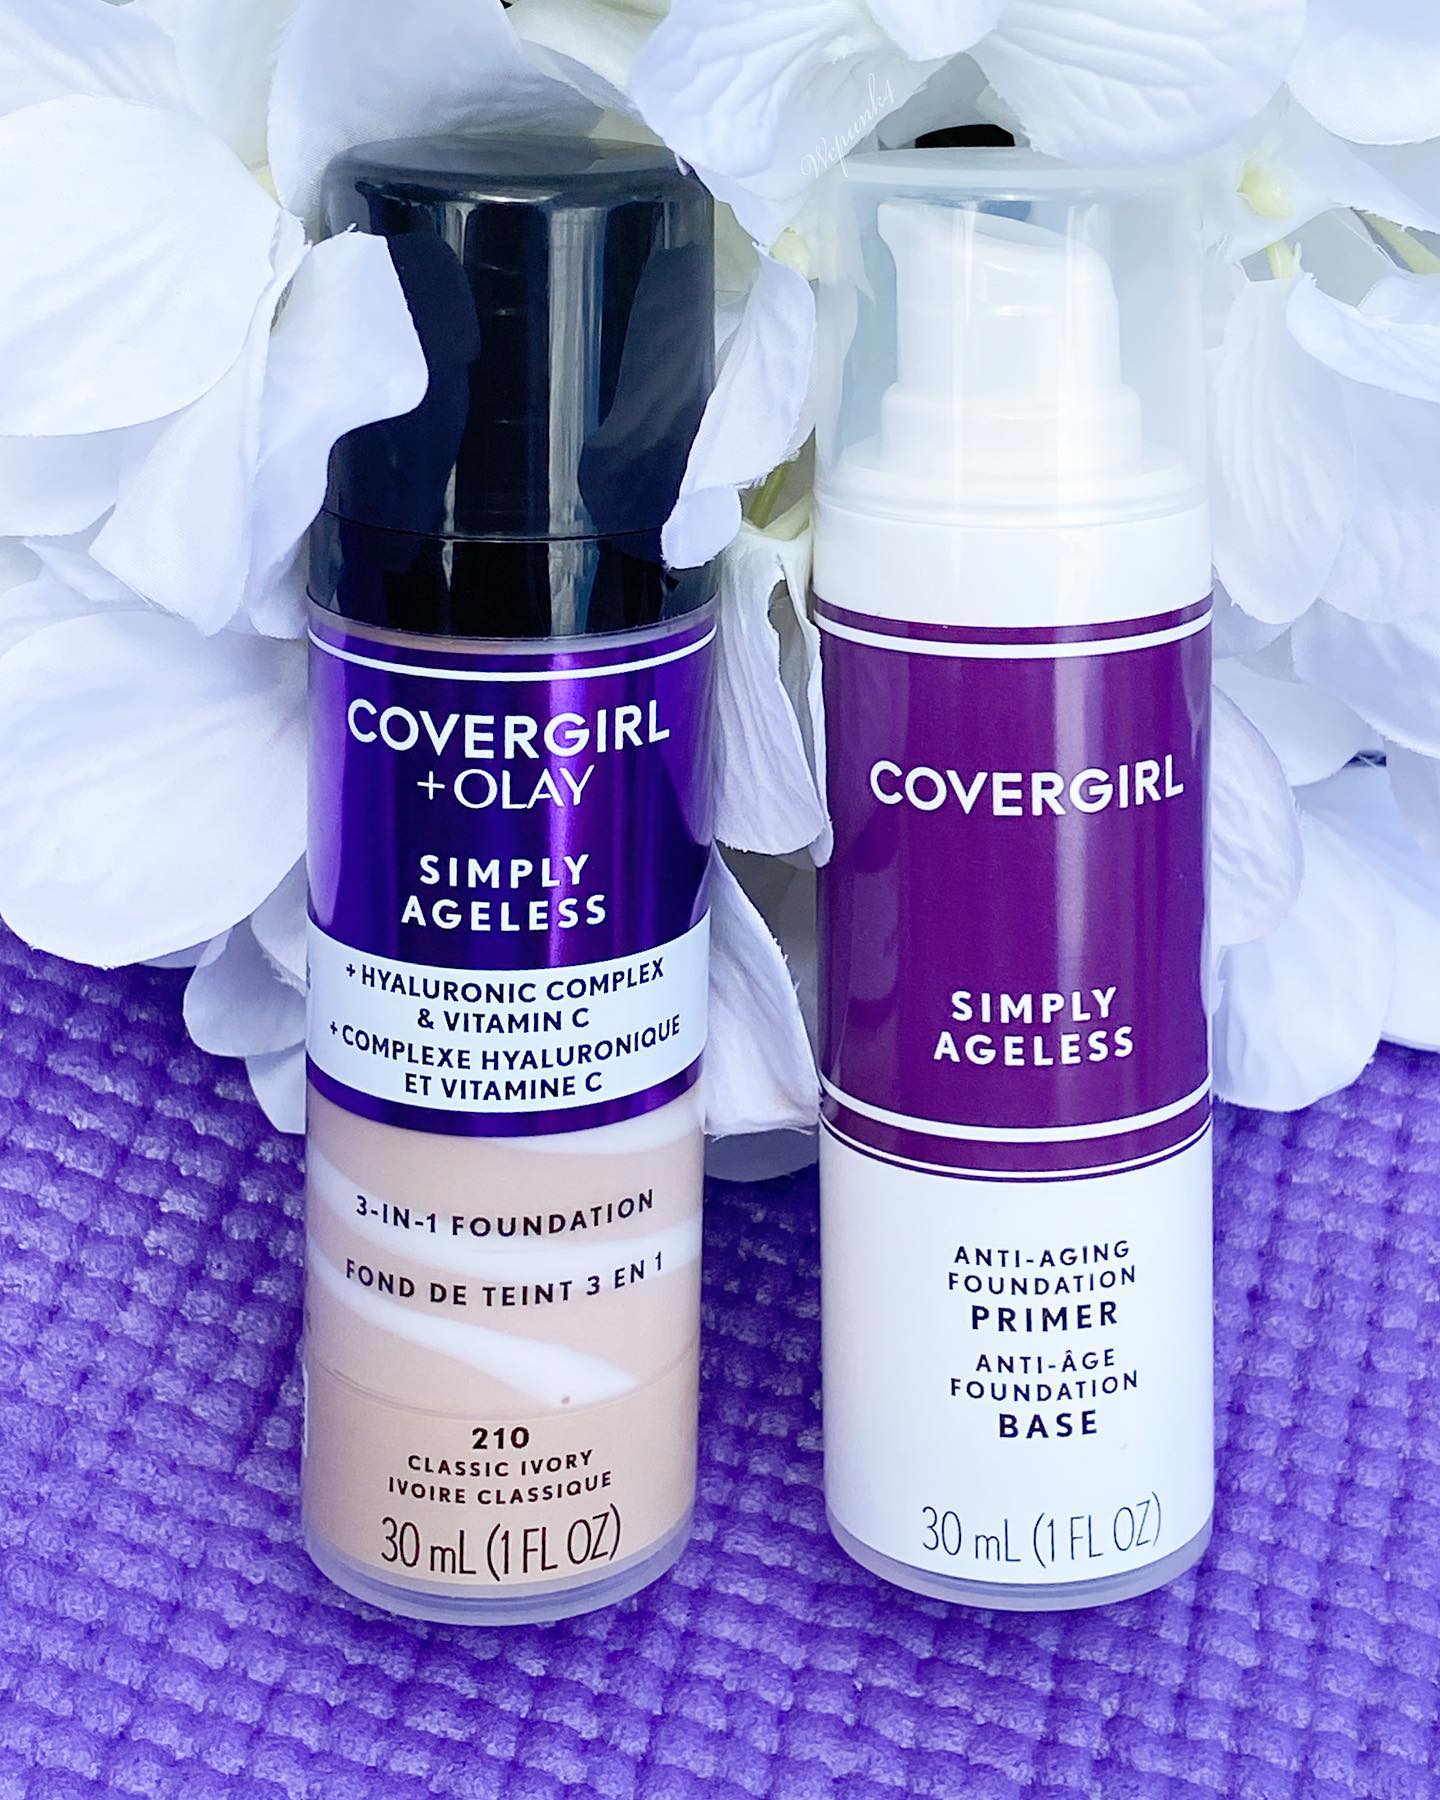 Covergirl + Olay Anti Aging Foundation